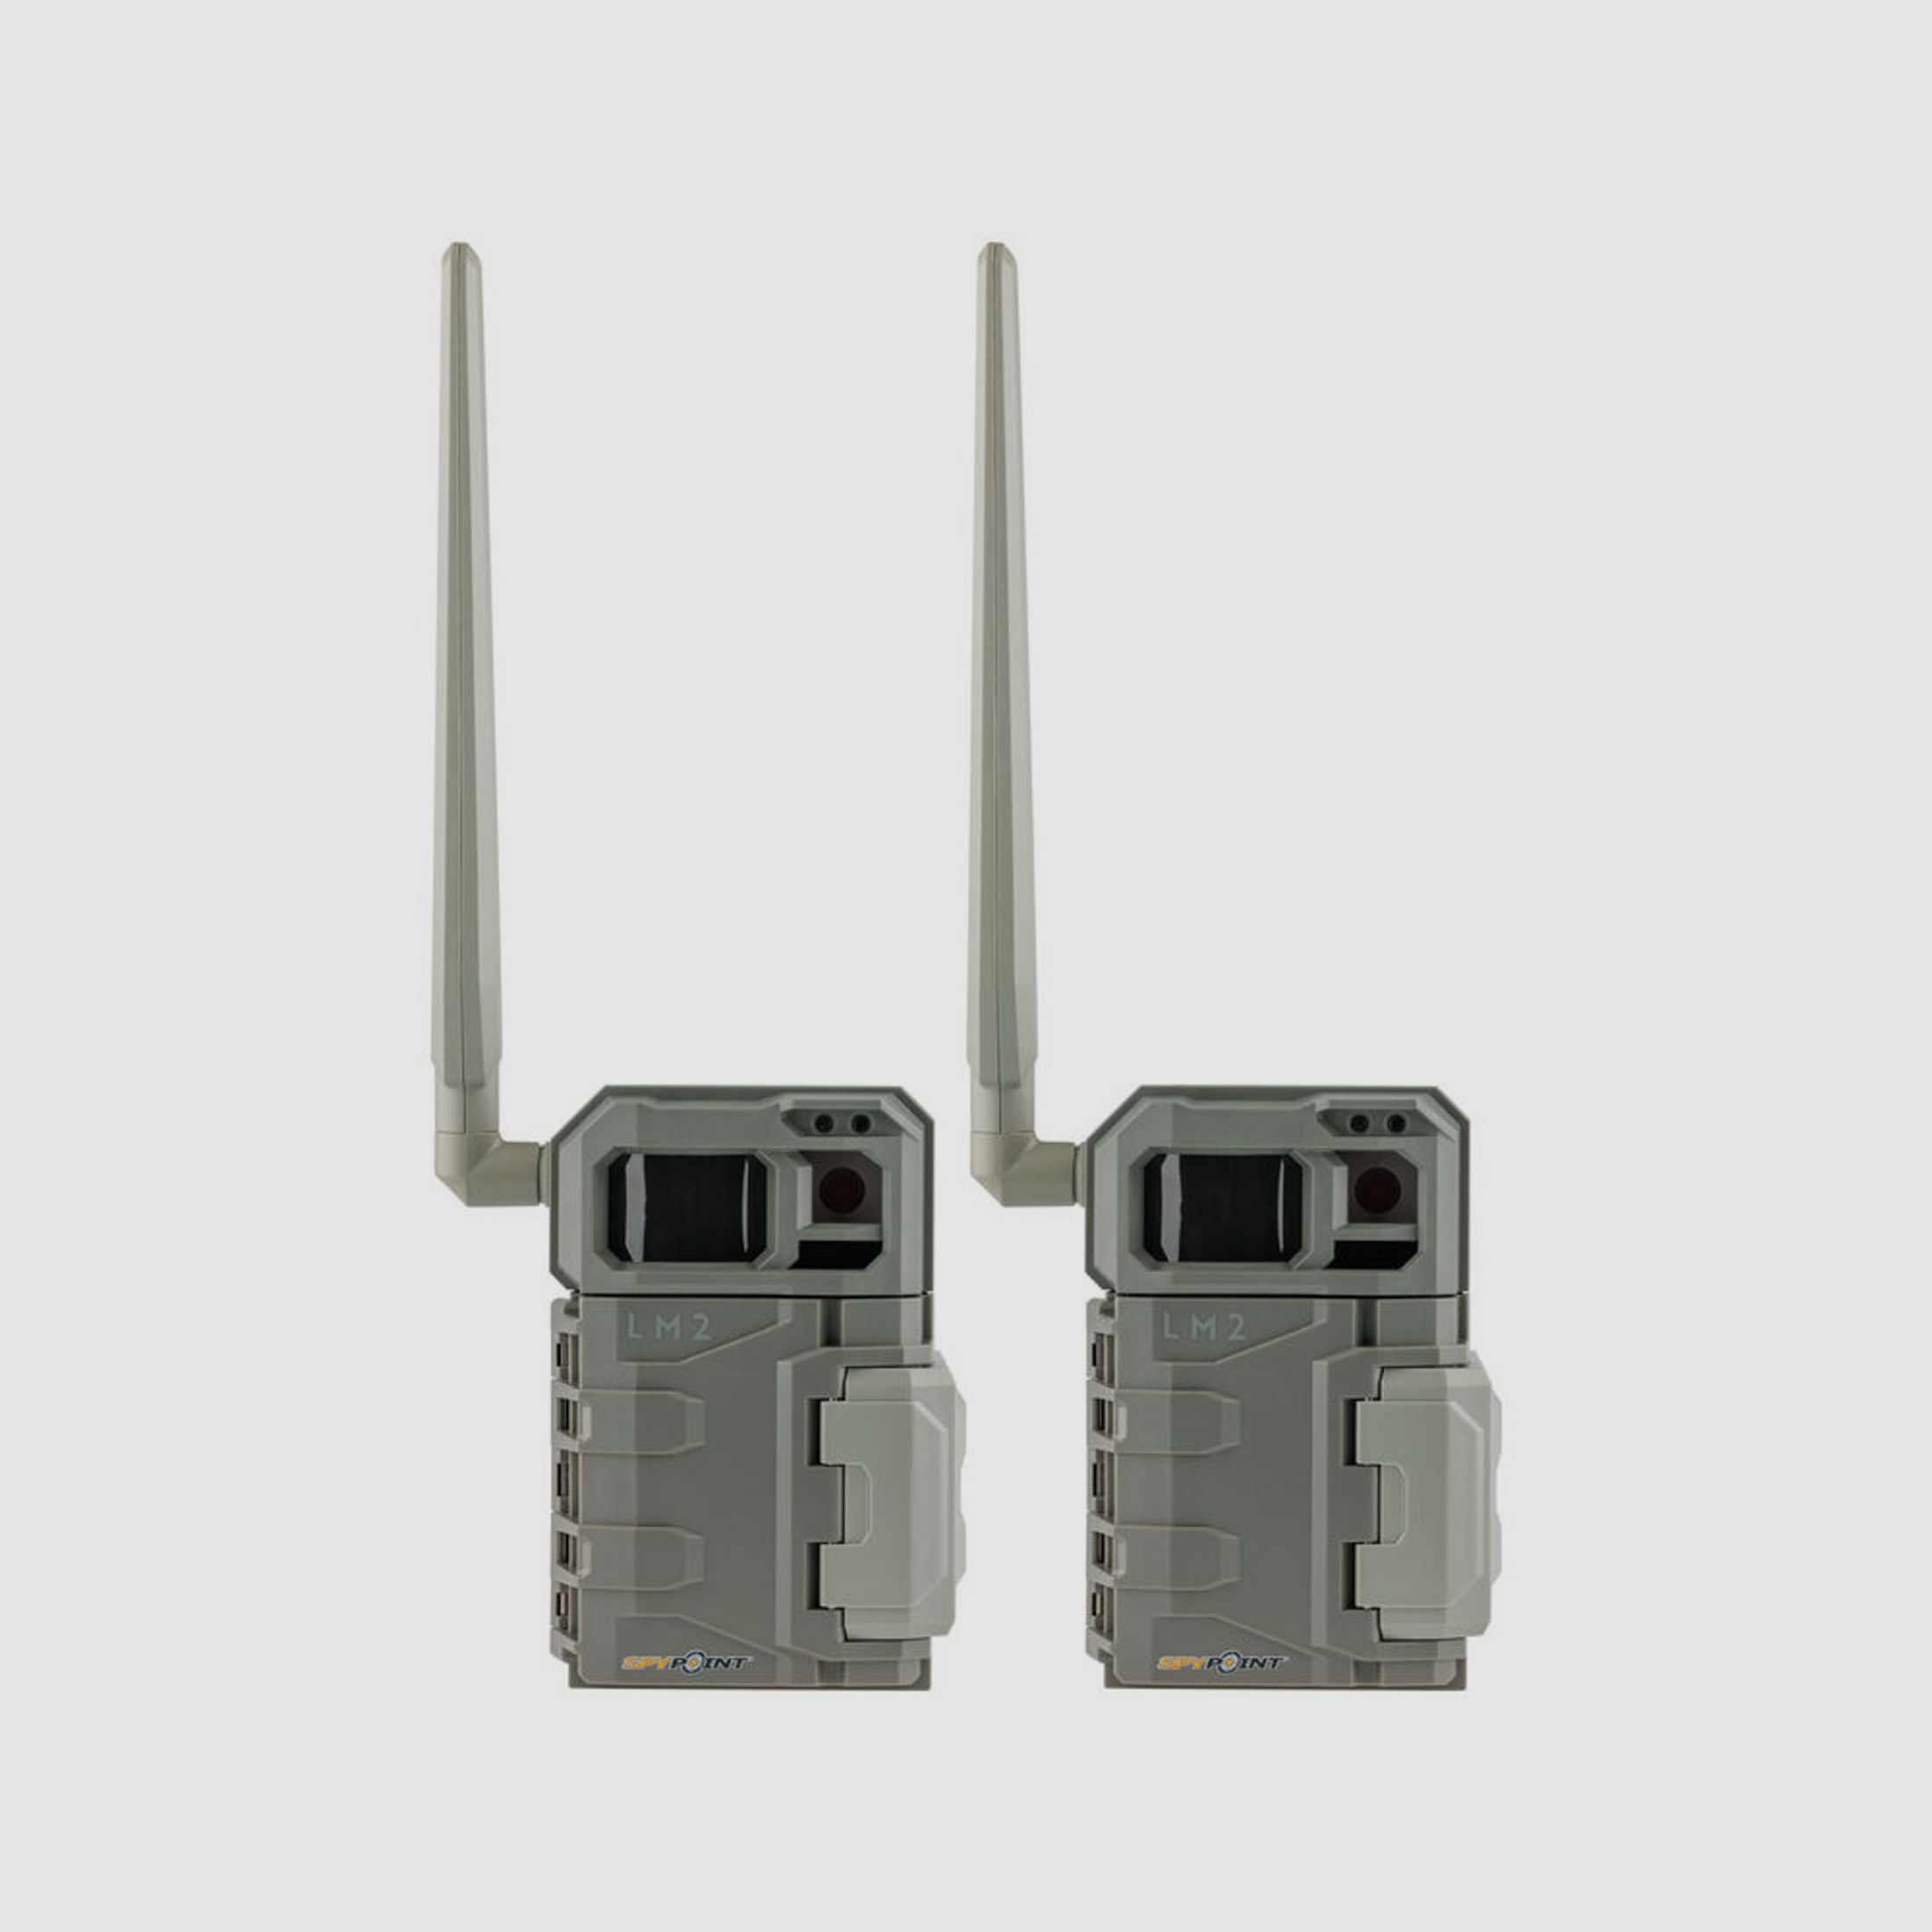 Spypoint	 Spypoint LM2 Twin-Pack, Wildkamera